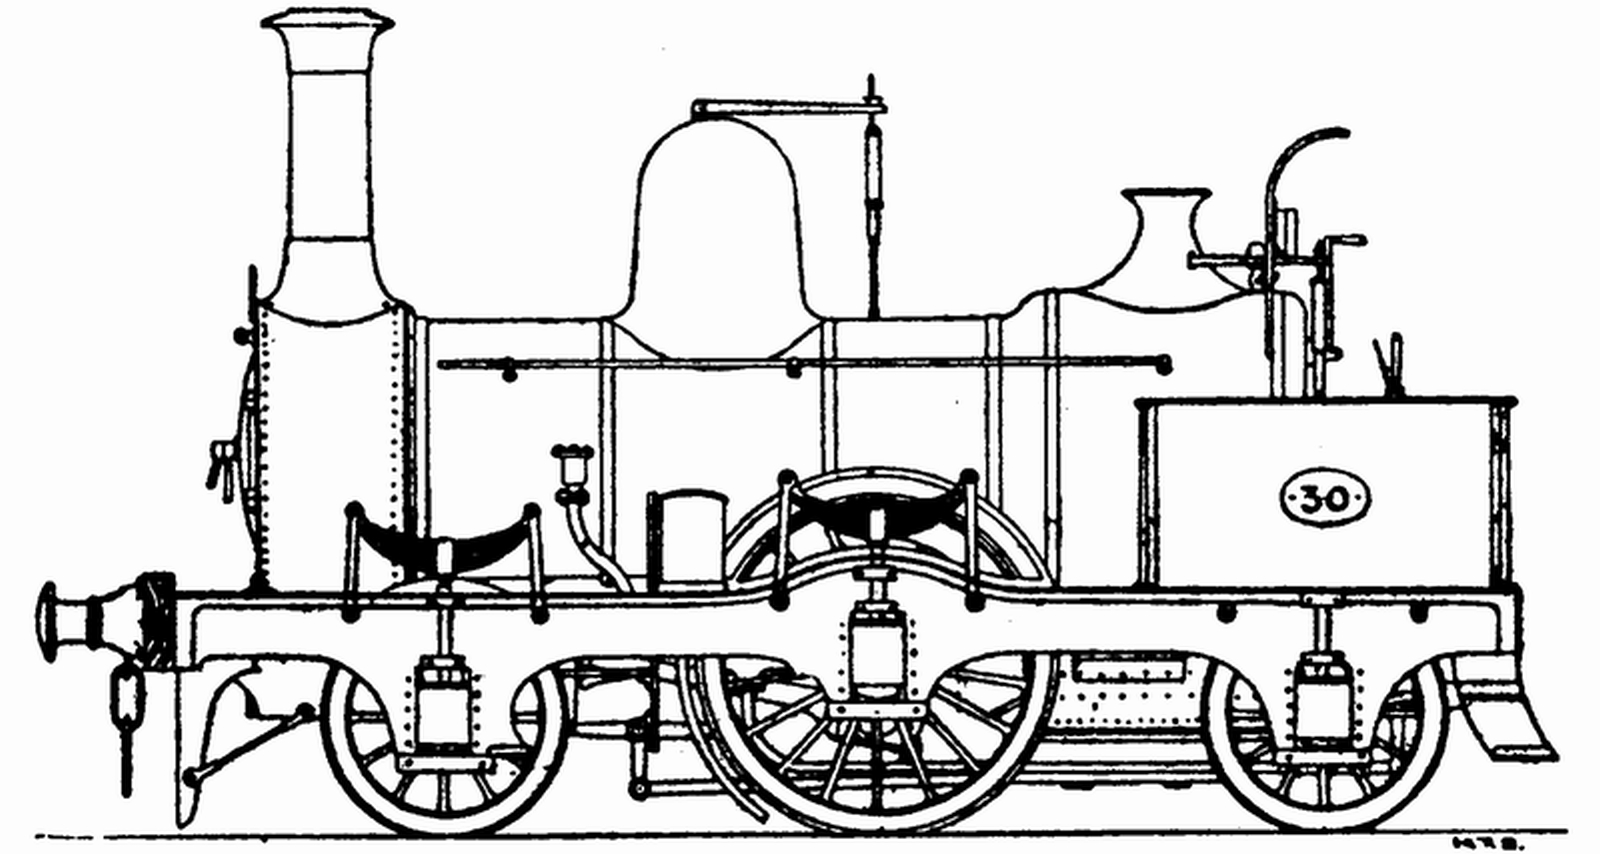 No. 30 with double bearing of the driving axle